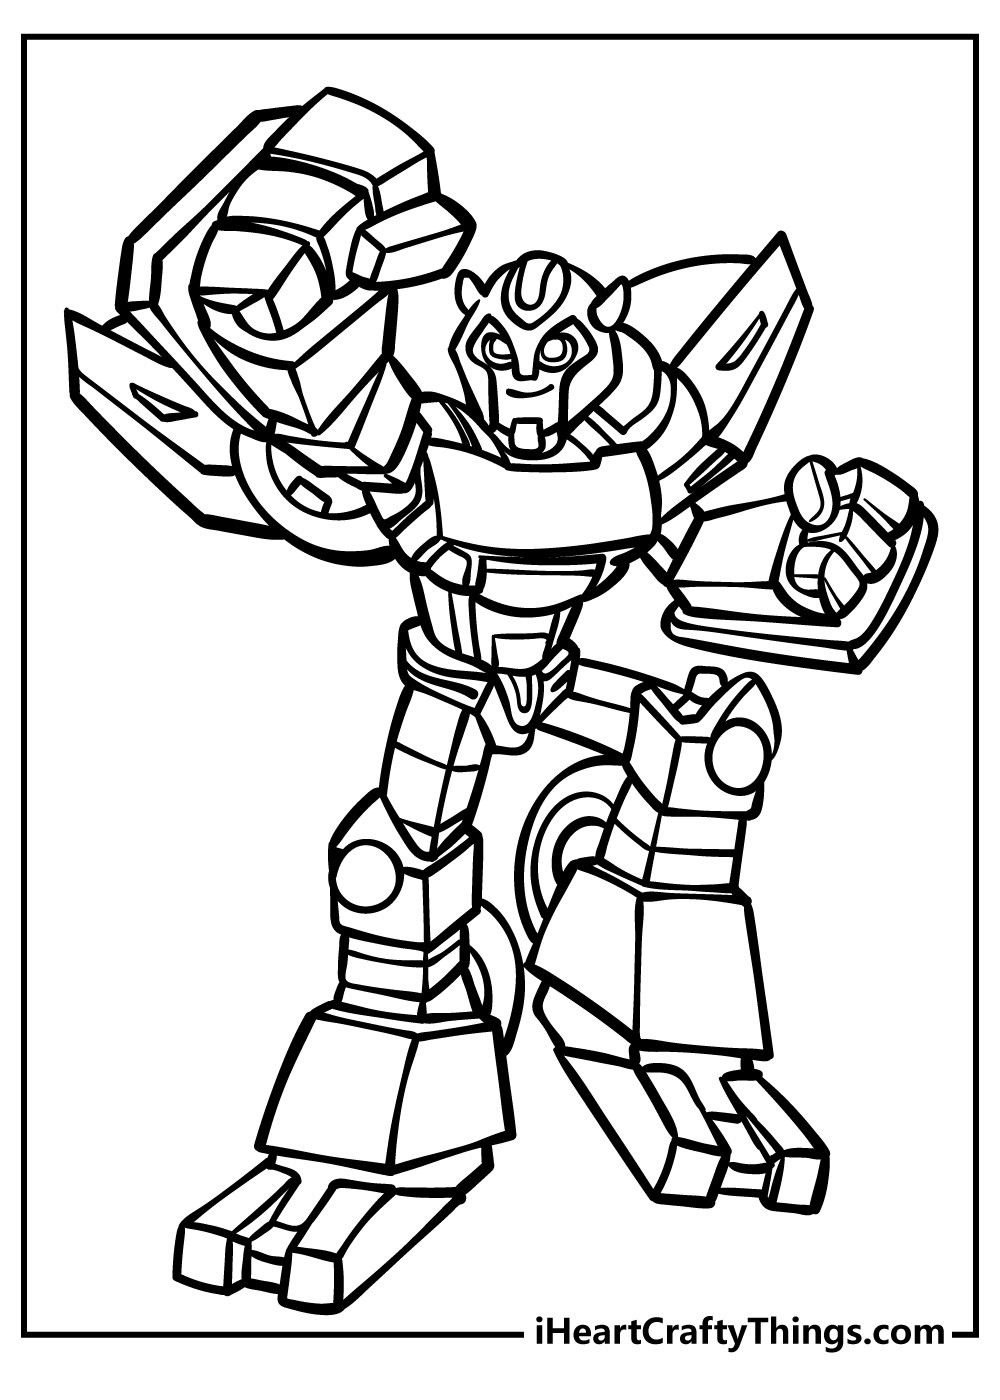 Transformers Coloring Pages for adults free printable